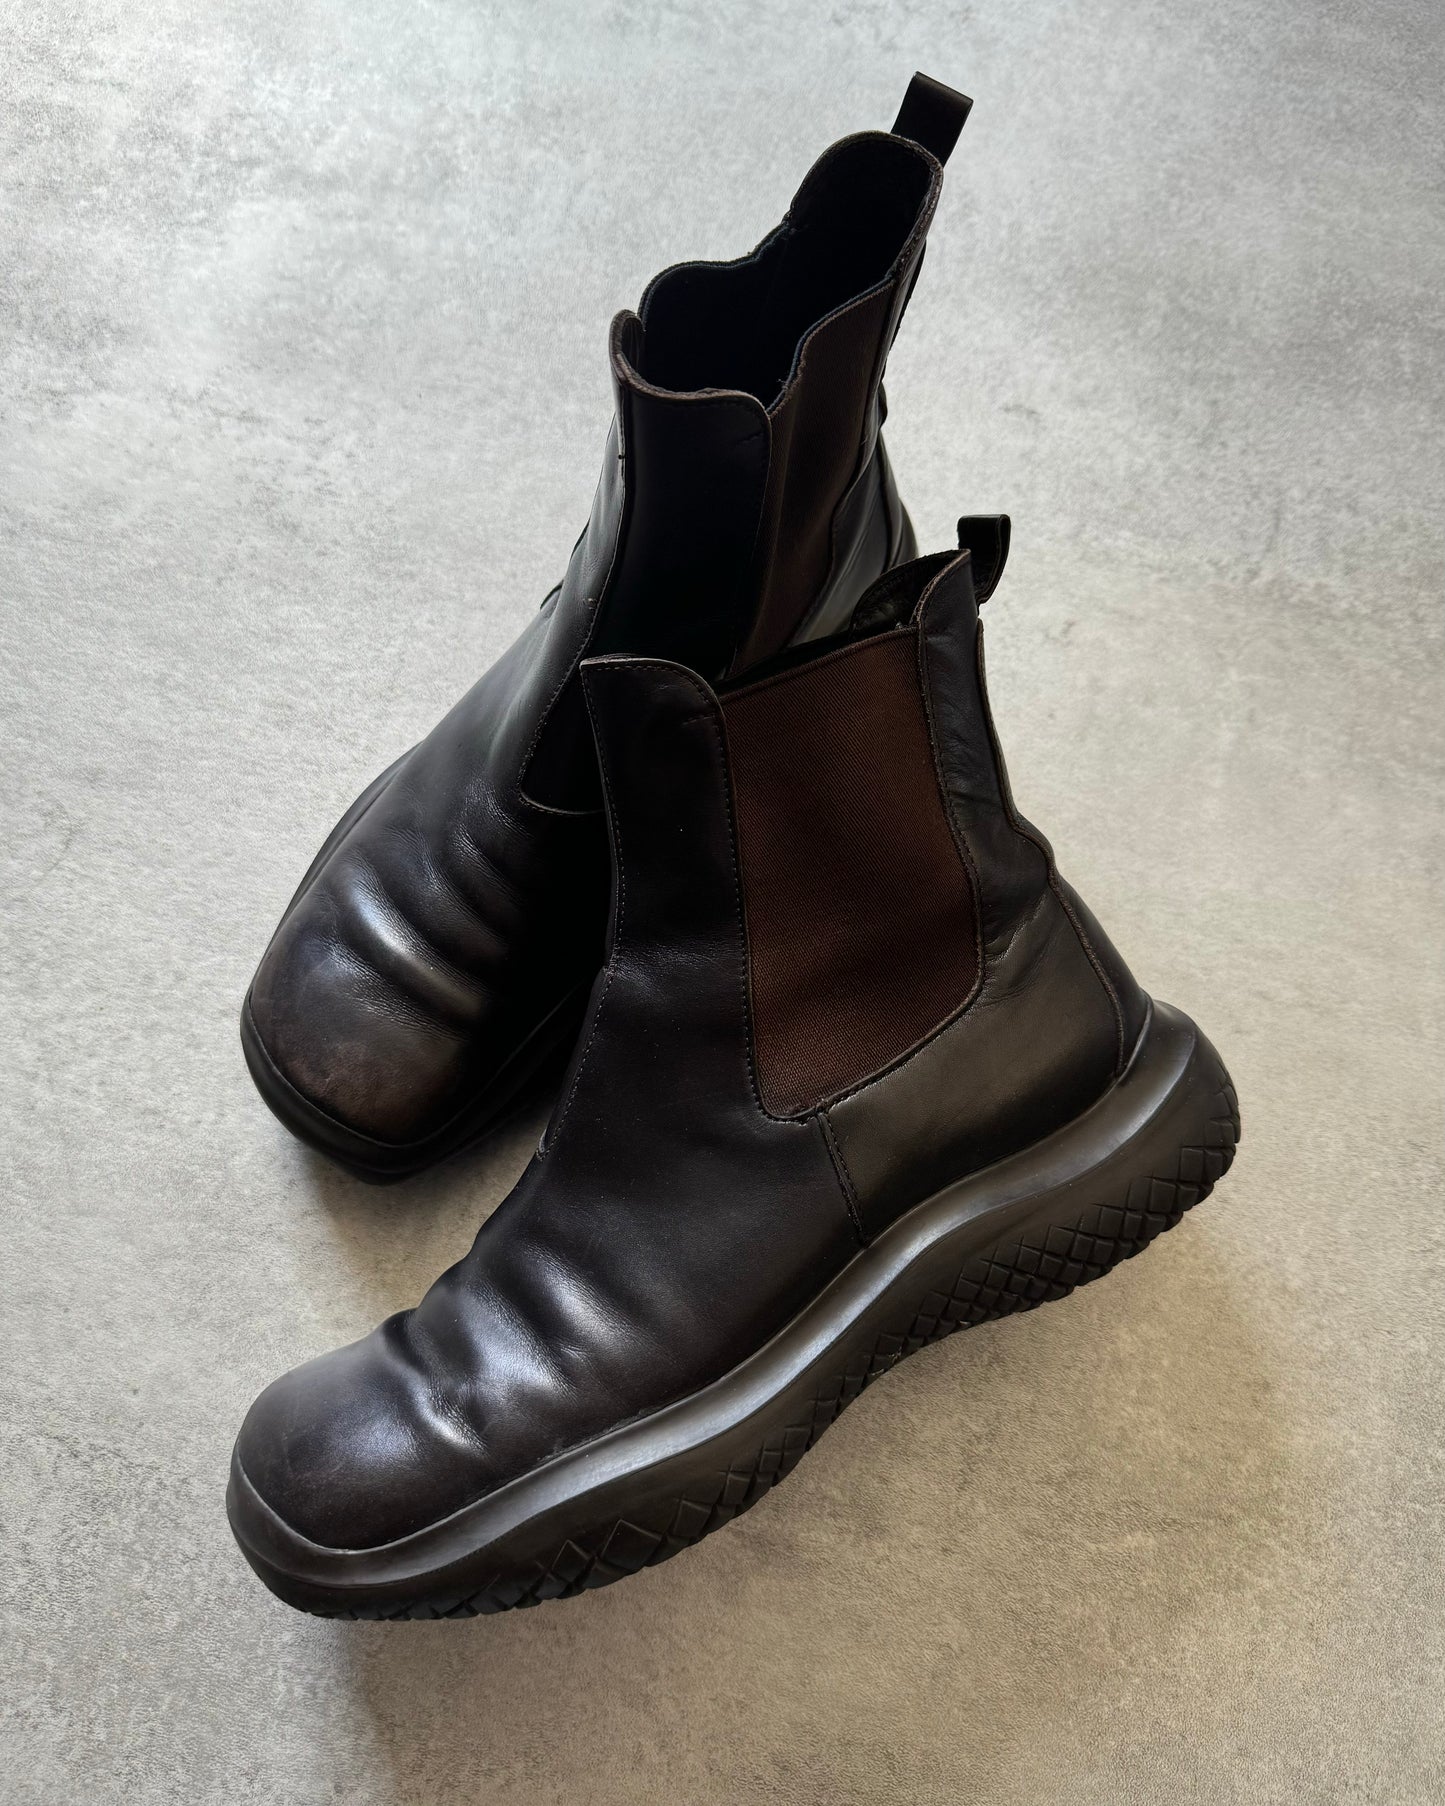 FW1999 Prada Brown Leather Boots (41) - 6